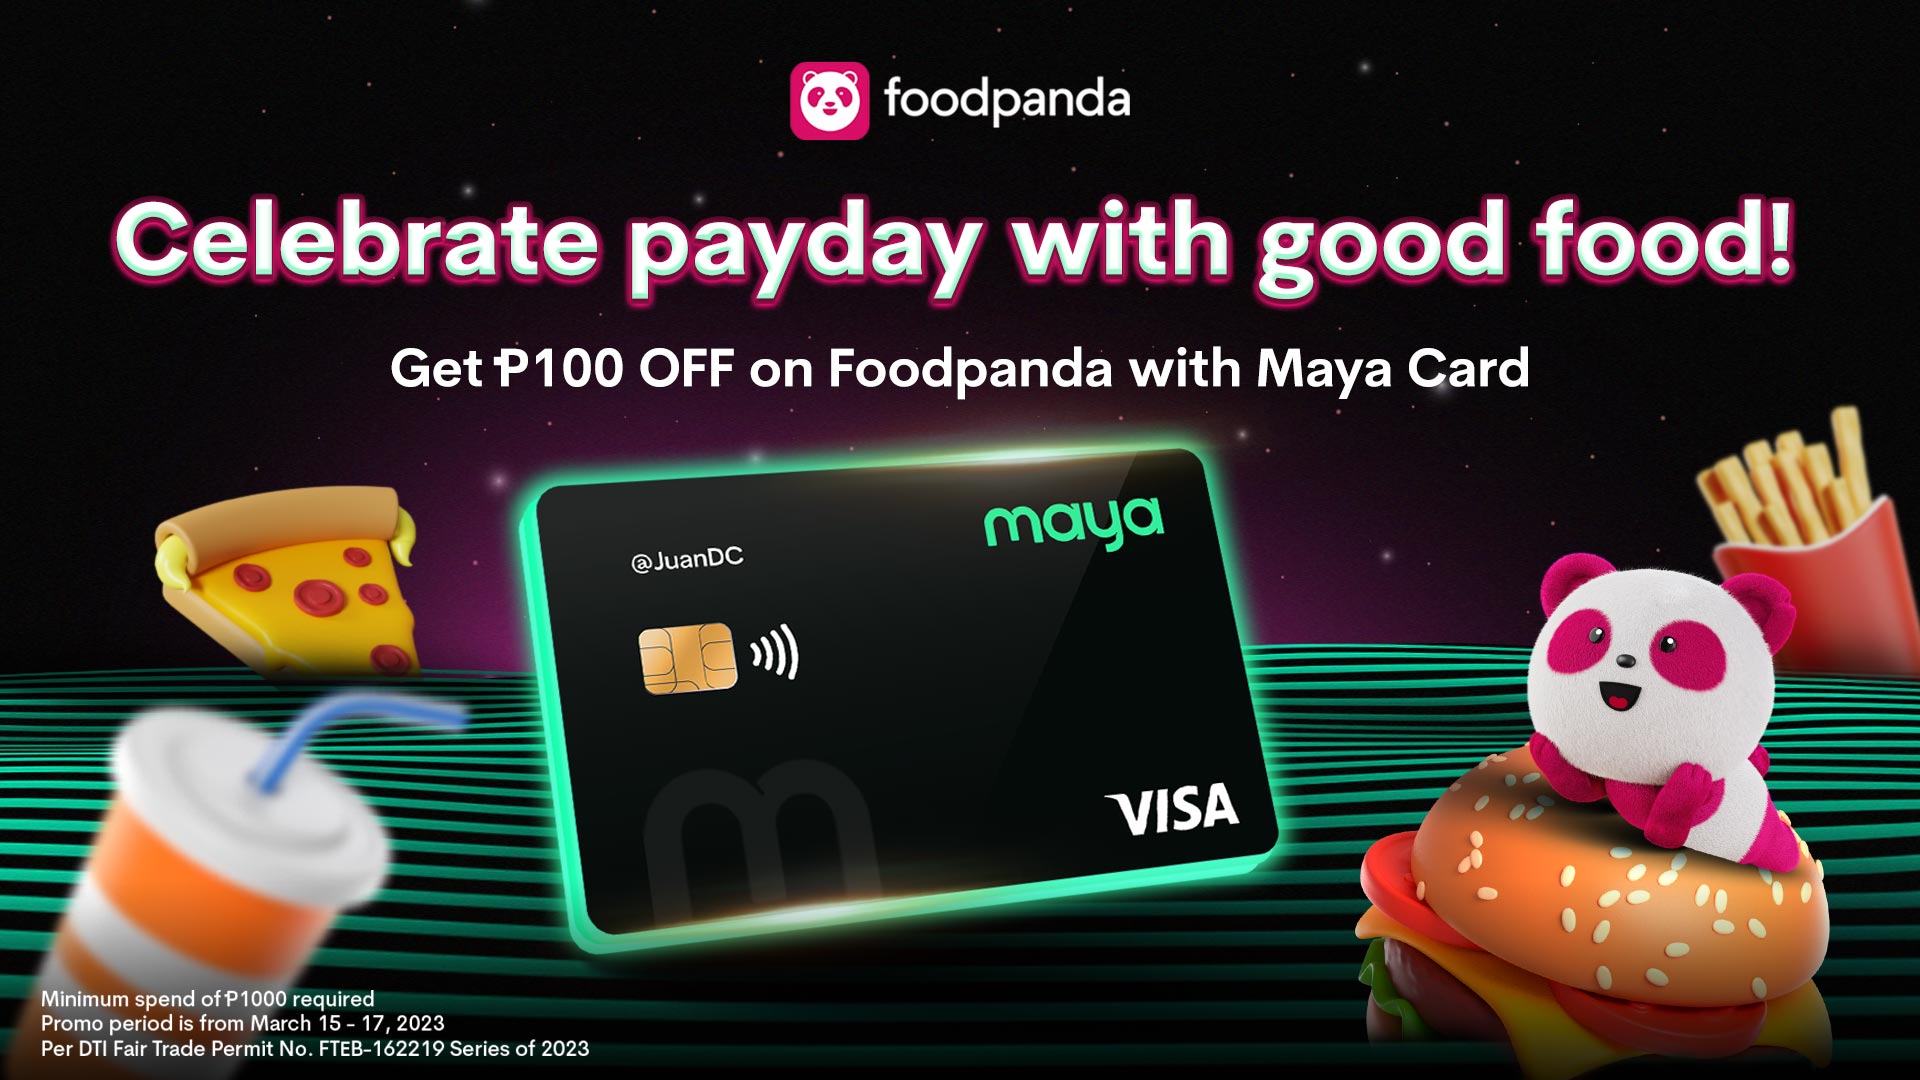 Get P100 OFF directly upon checkout on foodpanda